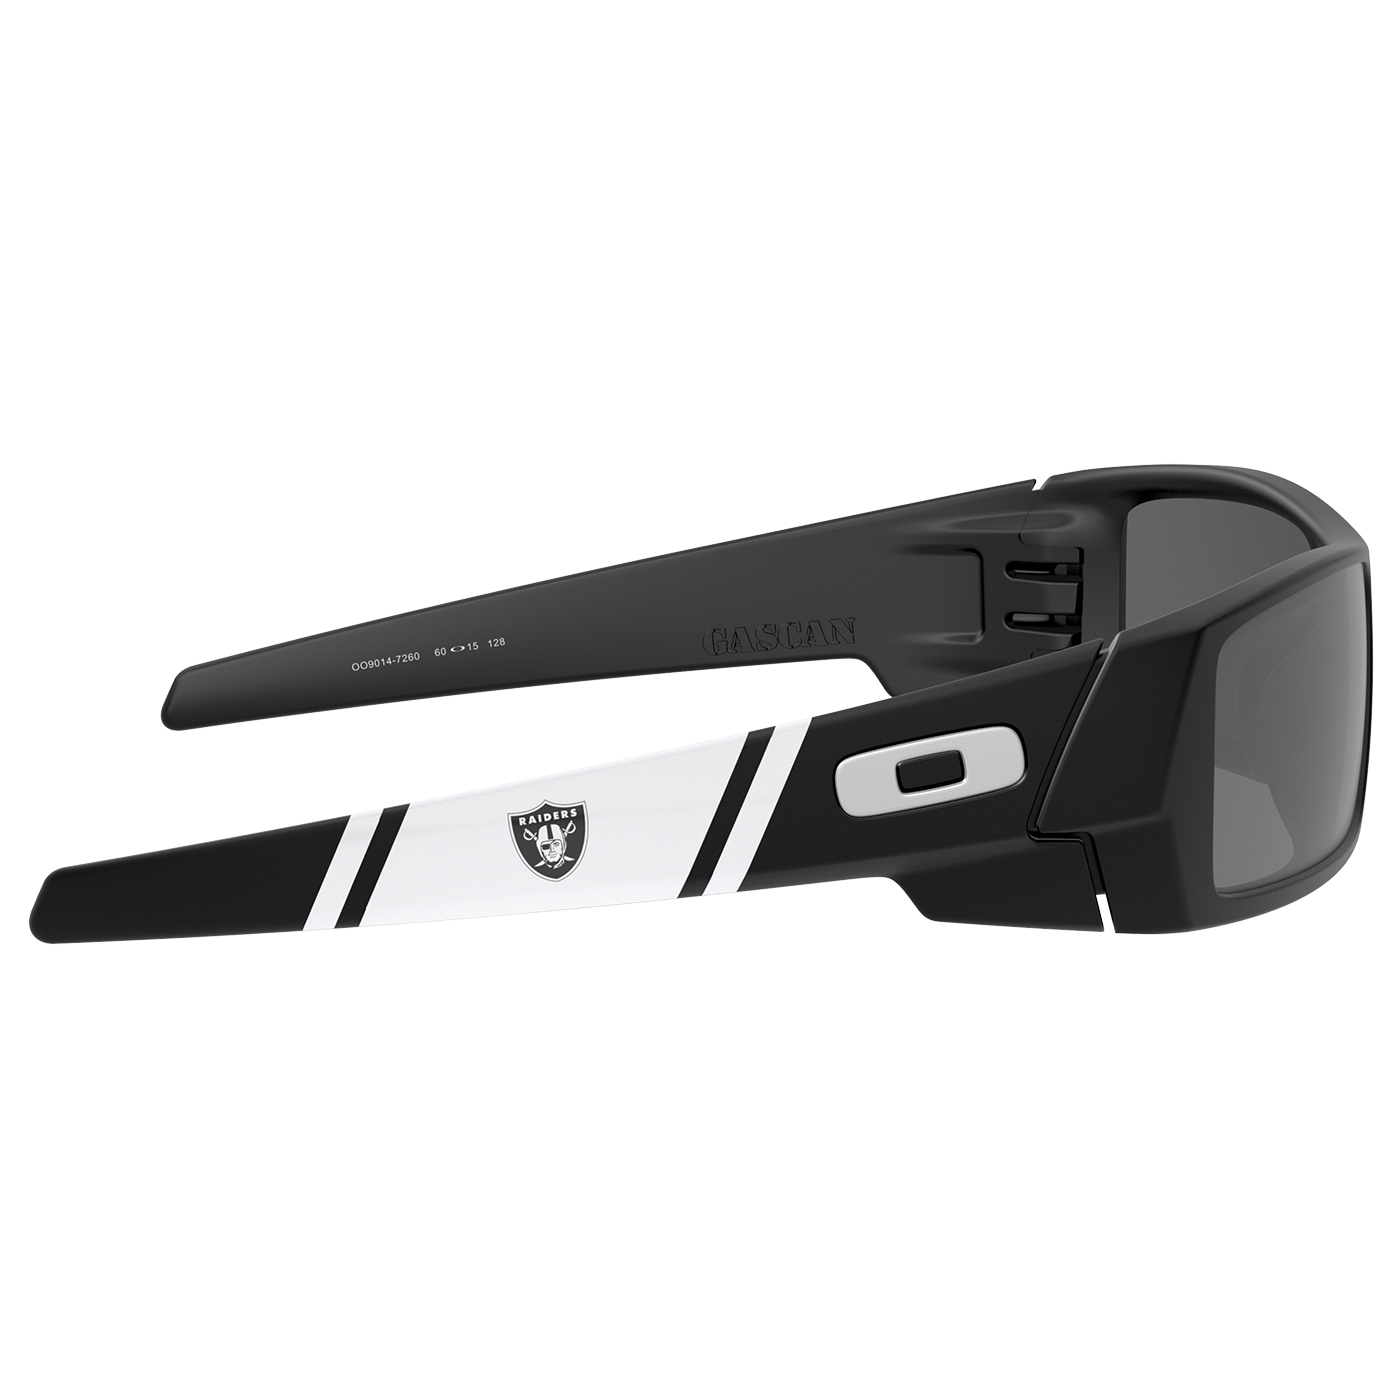 Product Detail | OAKLEY GASCAN SUNGLASSES